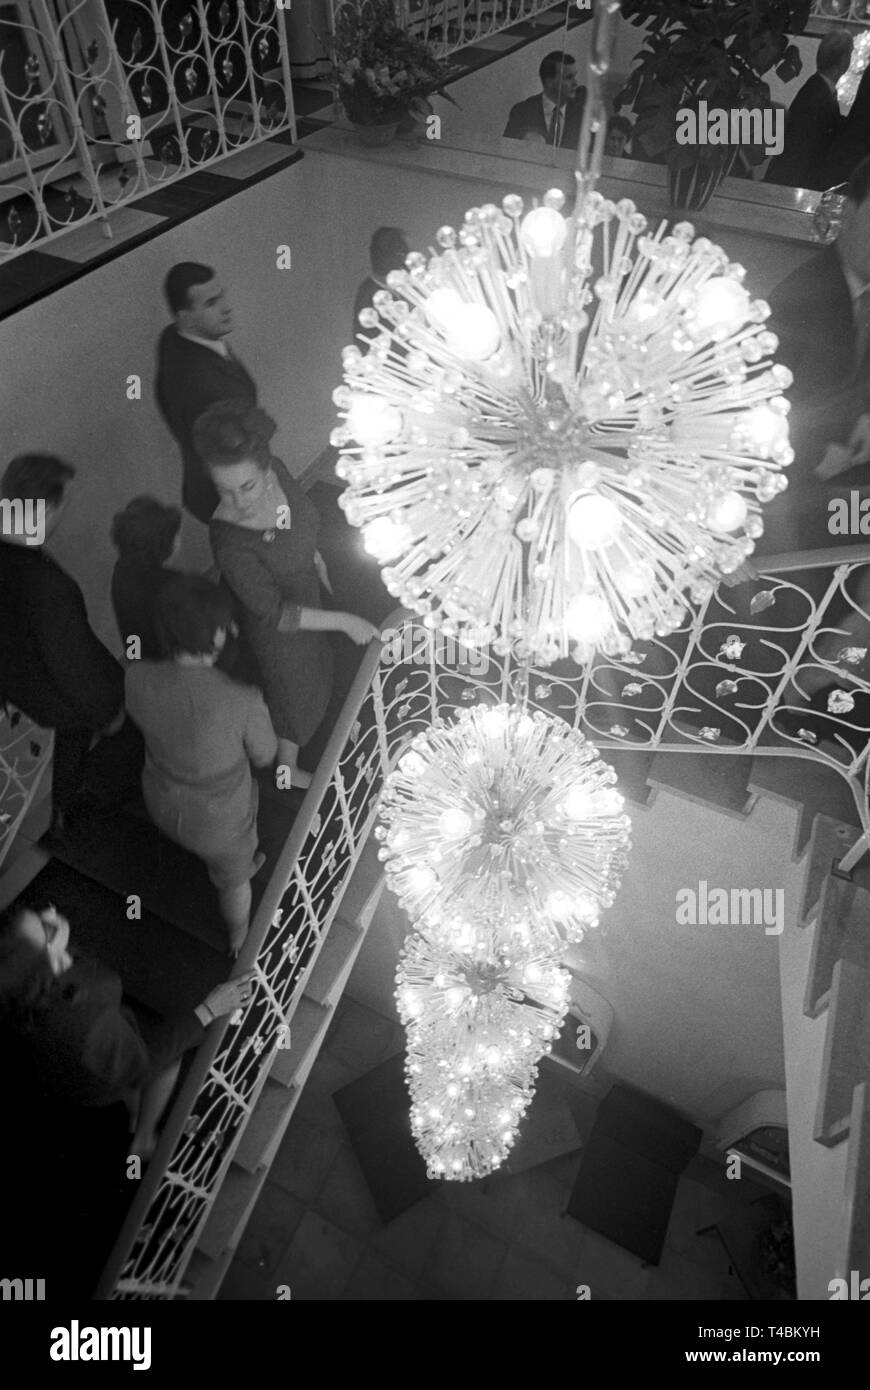 Theatregoers of the 'Frankfurter Komödie', a theatre, make their way to their seats for the play 'Zauber der Jugend' (translated as 'the magic of youth') on 20 Decemrber 1963. The picture shows a modern lamp, consisting of several spherical luminous elements. | usage worldwide Stock Photo